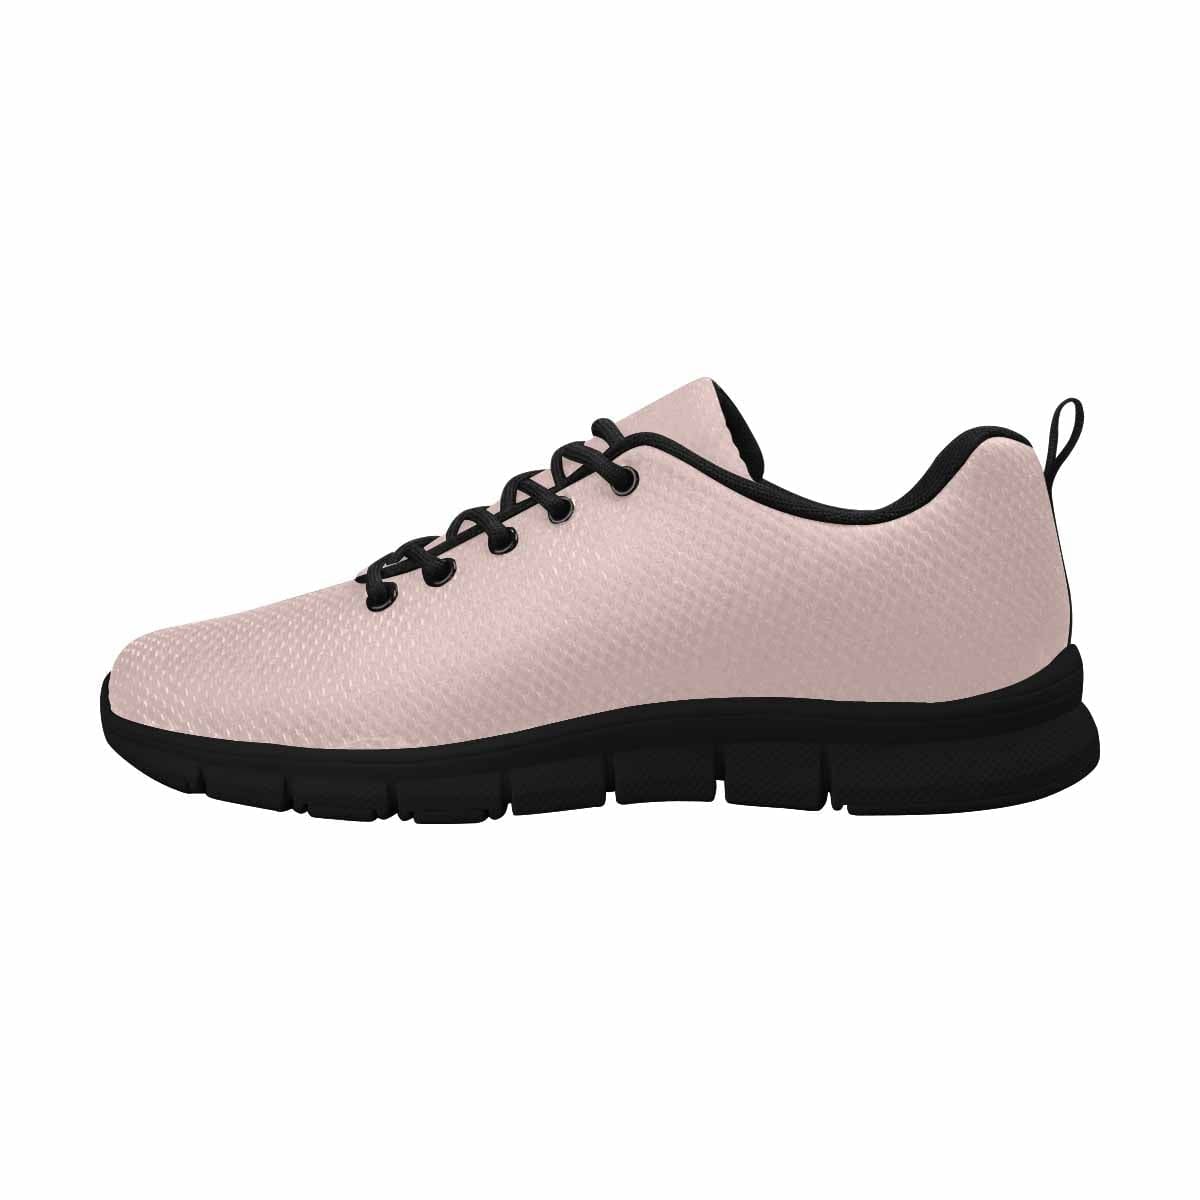 Sneakers For Women Seashell Pink - Womens | Sneakers | Running